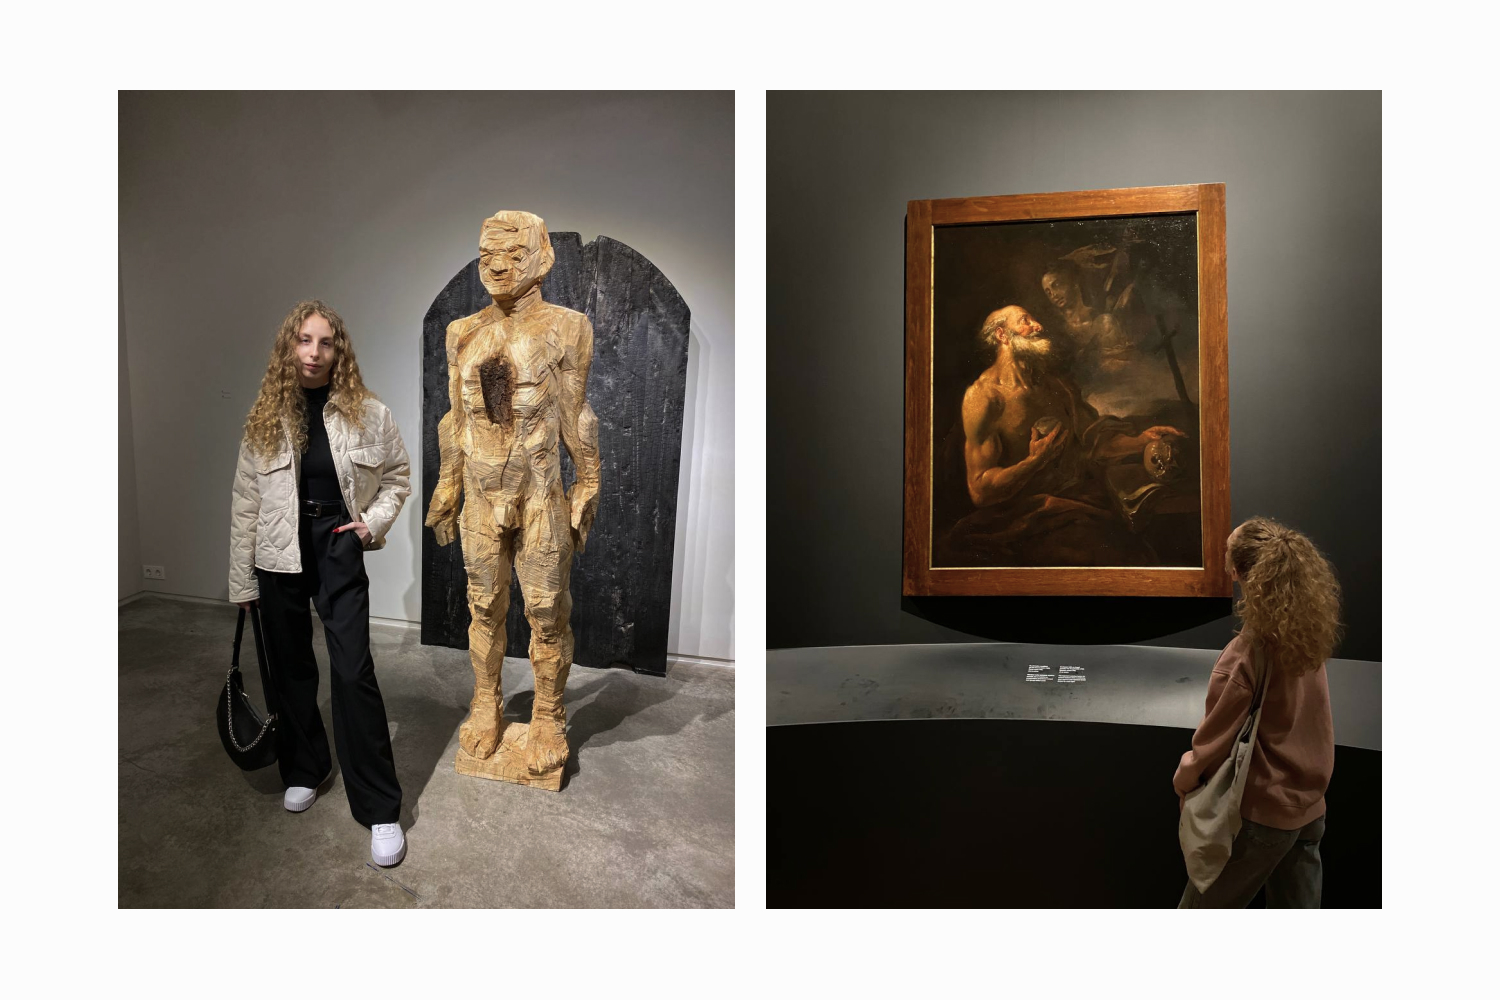 Photos of Valeria Vodyashina in the museum next to the sculpture and painting.